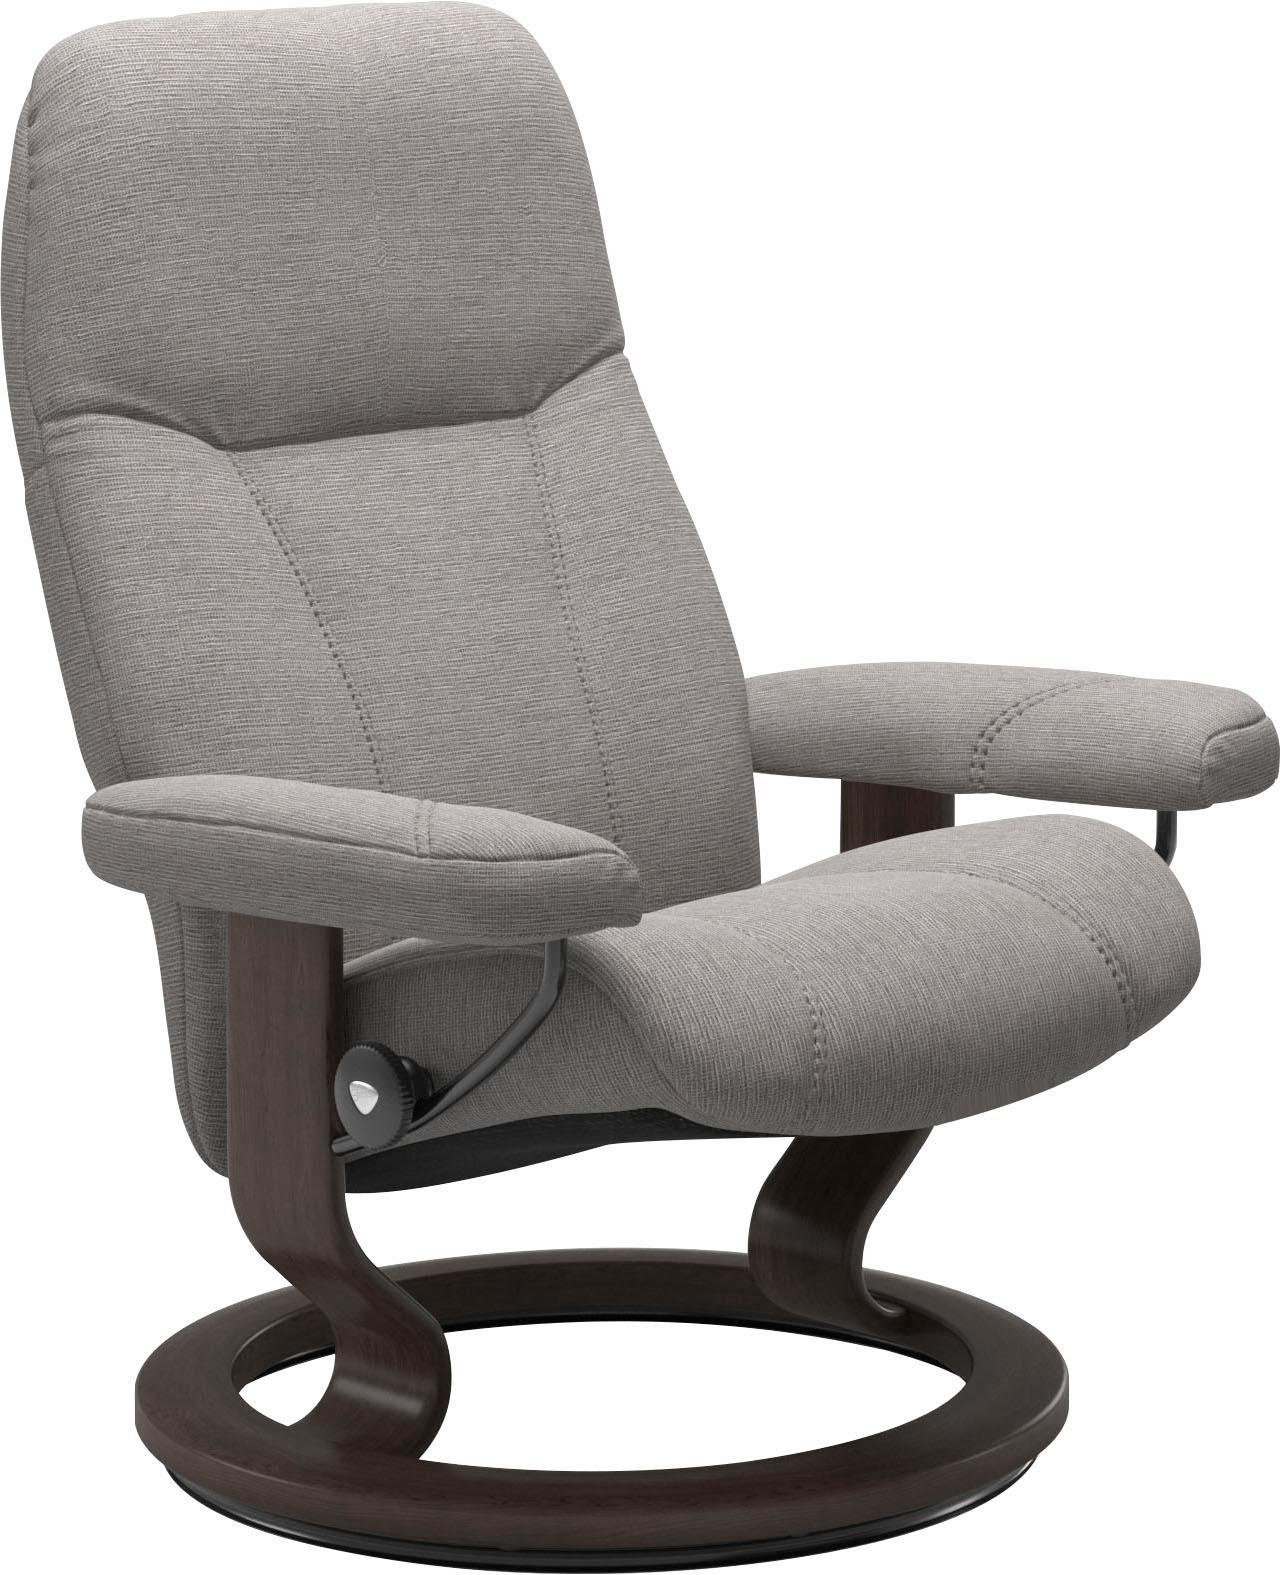 Base, Classic Wenge Größe Relaxsessel M, Consul, mit Gestell Stressless®